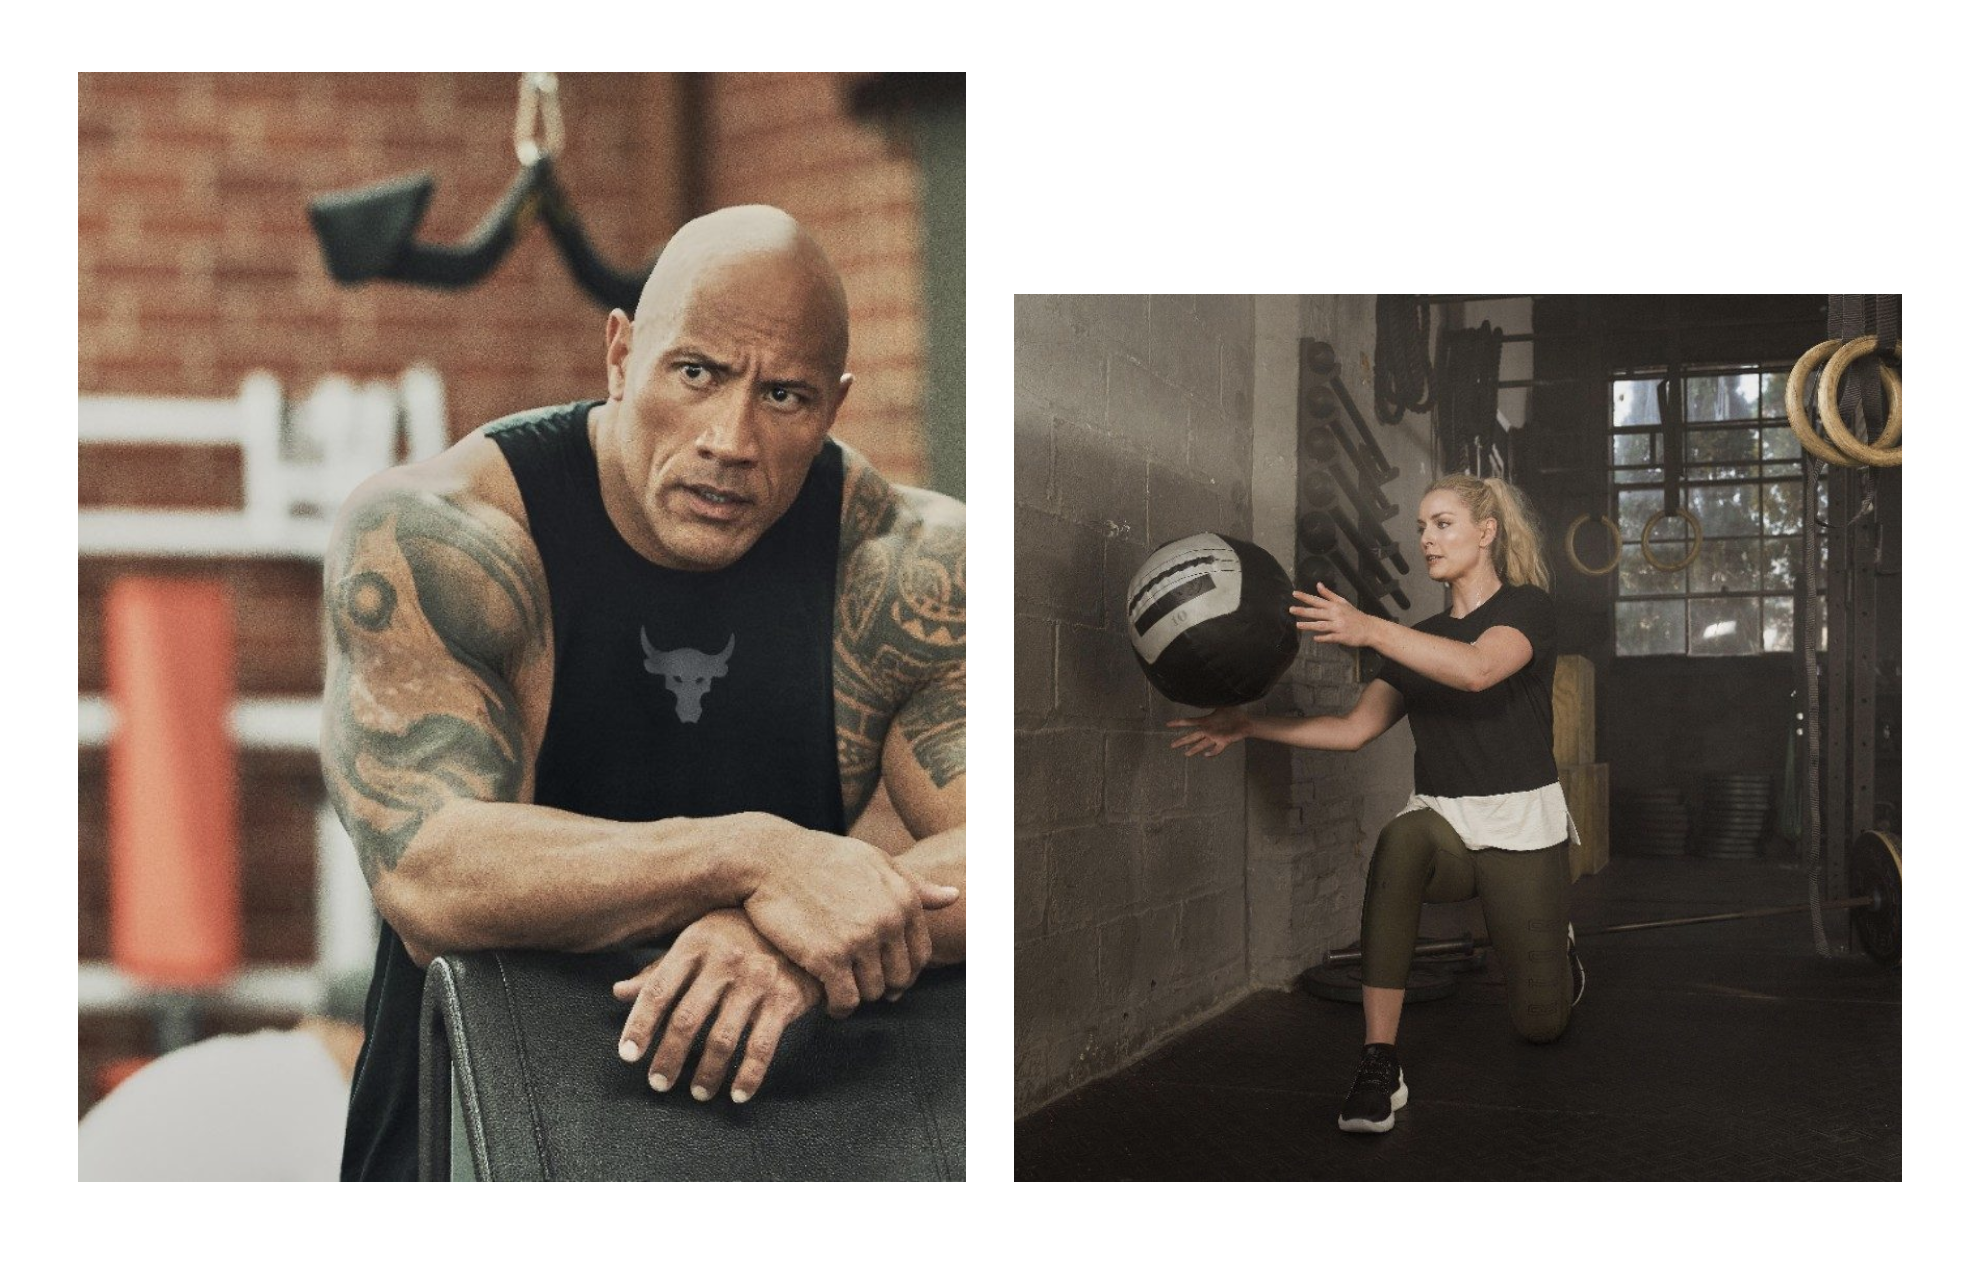 A couple of promo images from Under Armour’s “Project Rock Collection” influencer marketing campaign